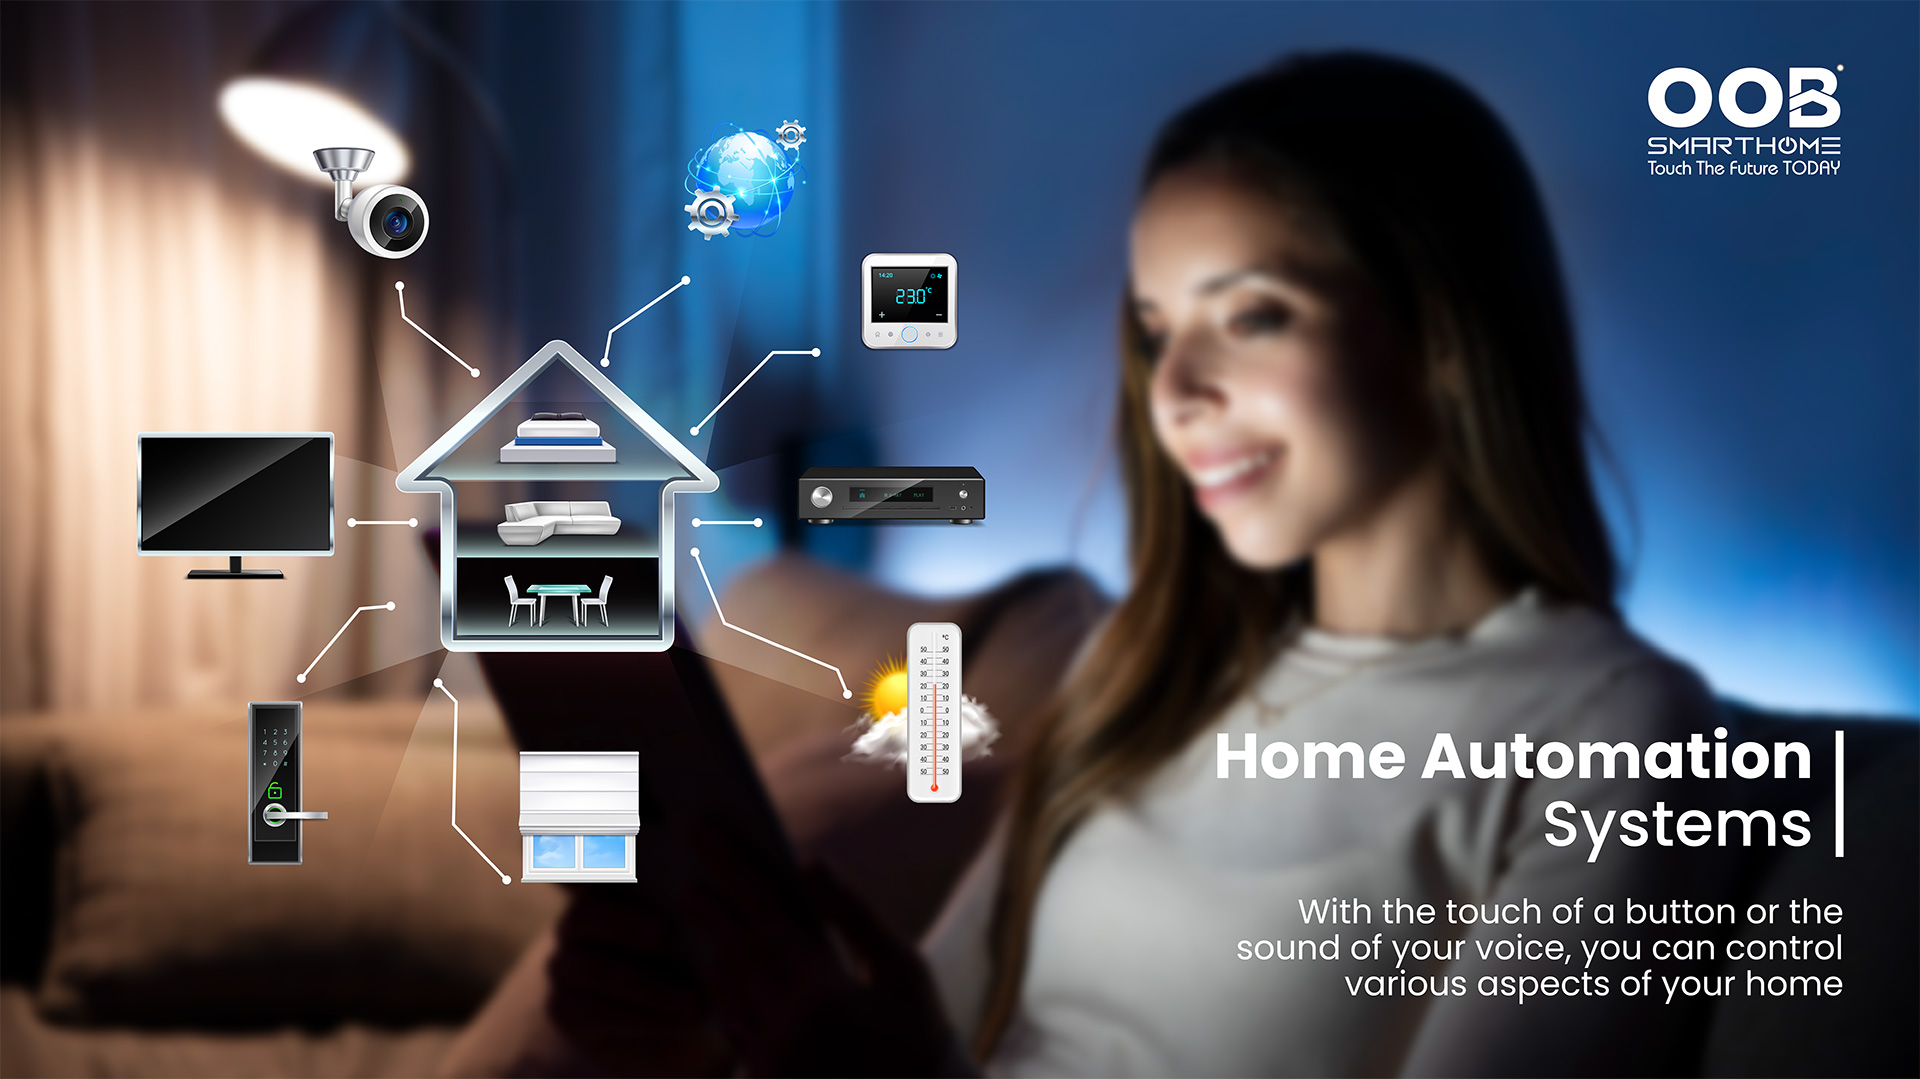 Why Should You Install Home Automation Systems